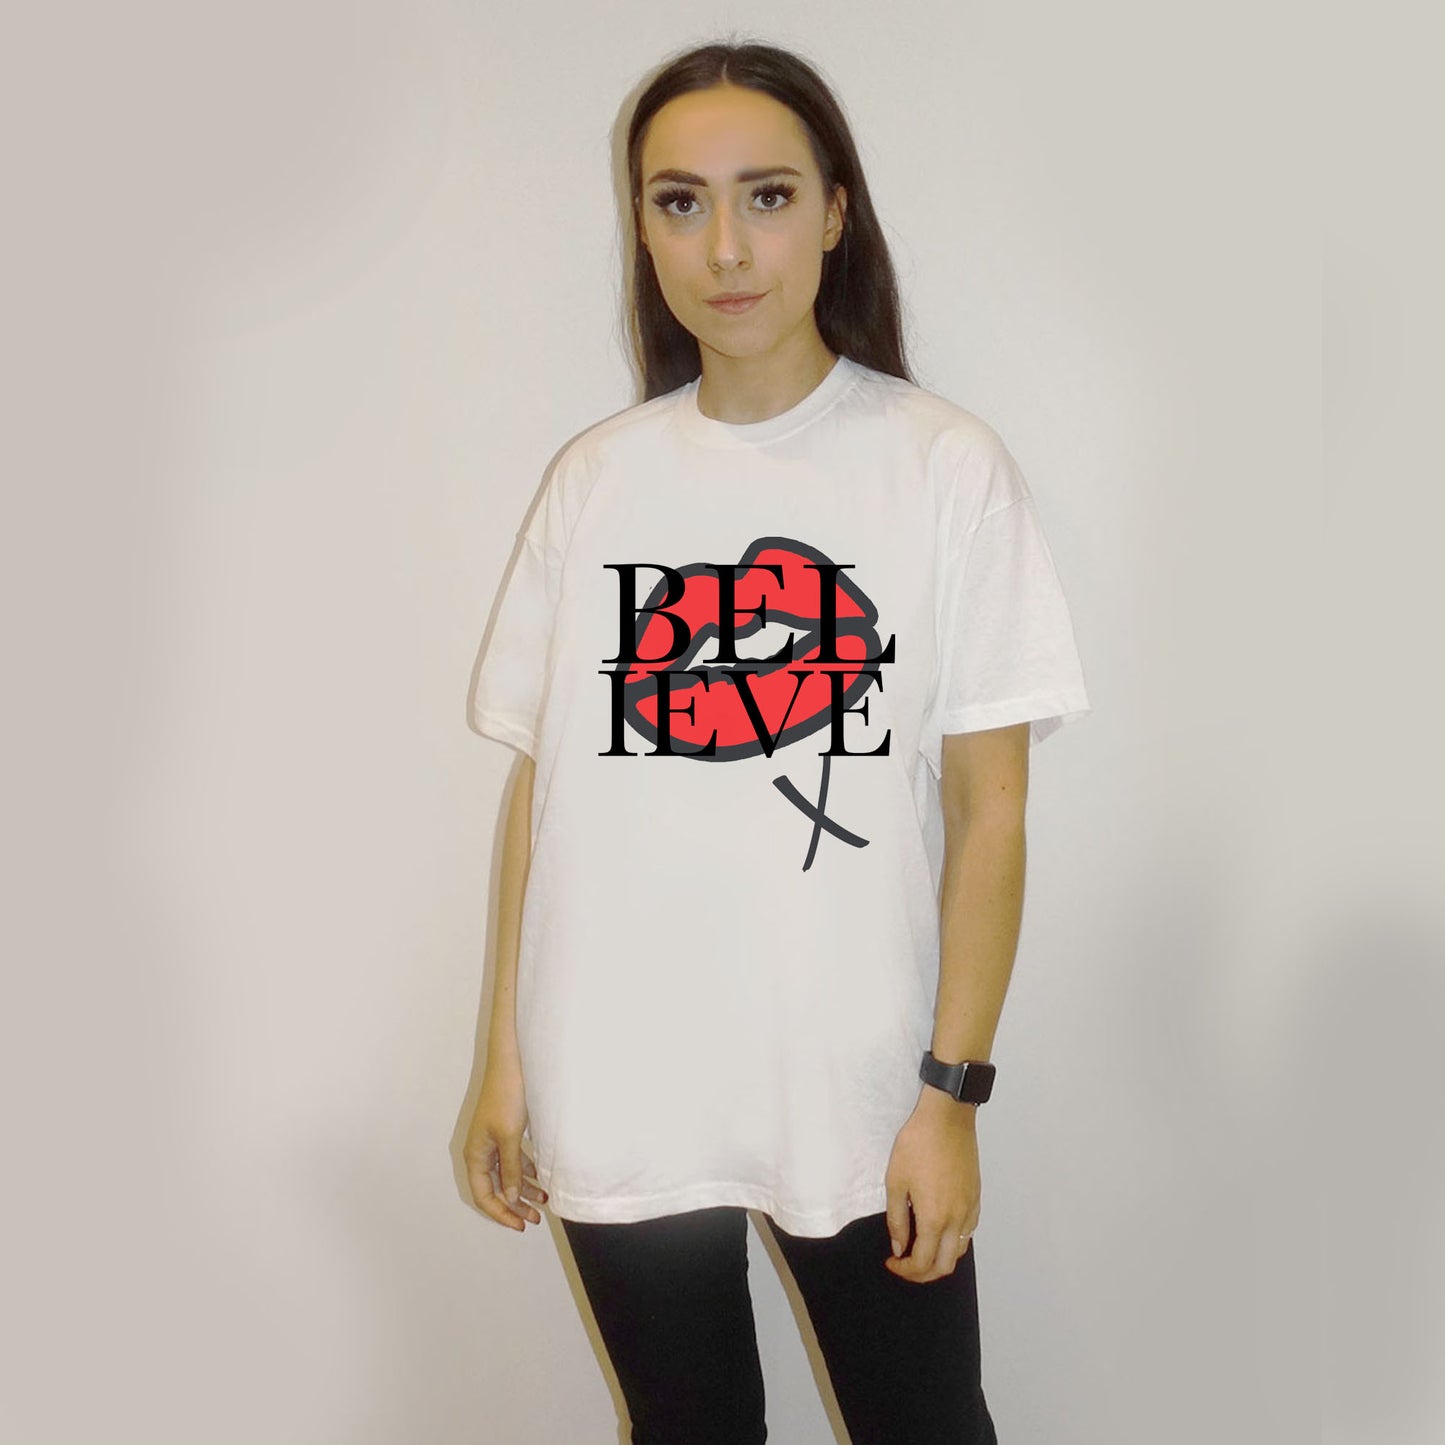 Believe Red Lip Kiss Tshirt In White